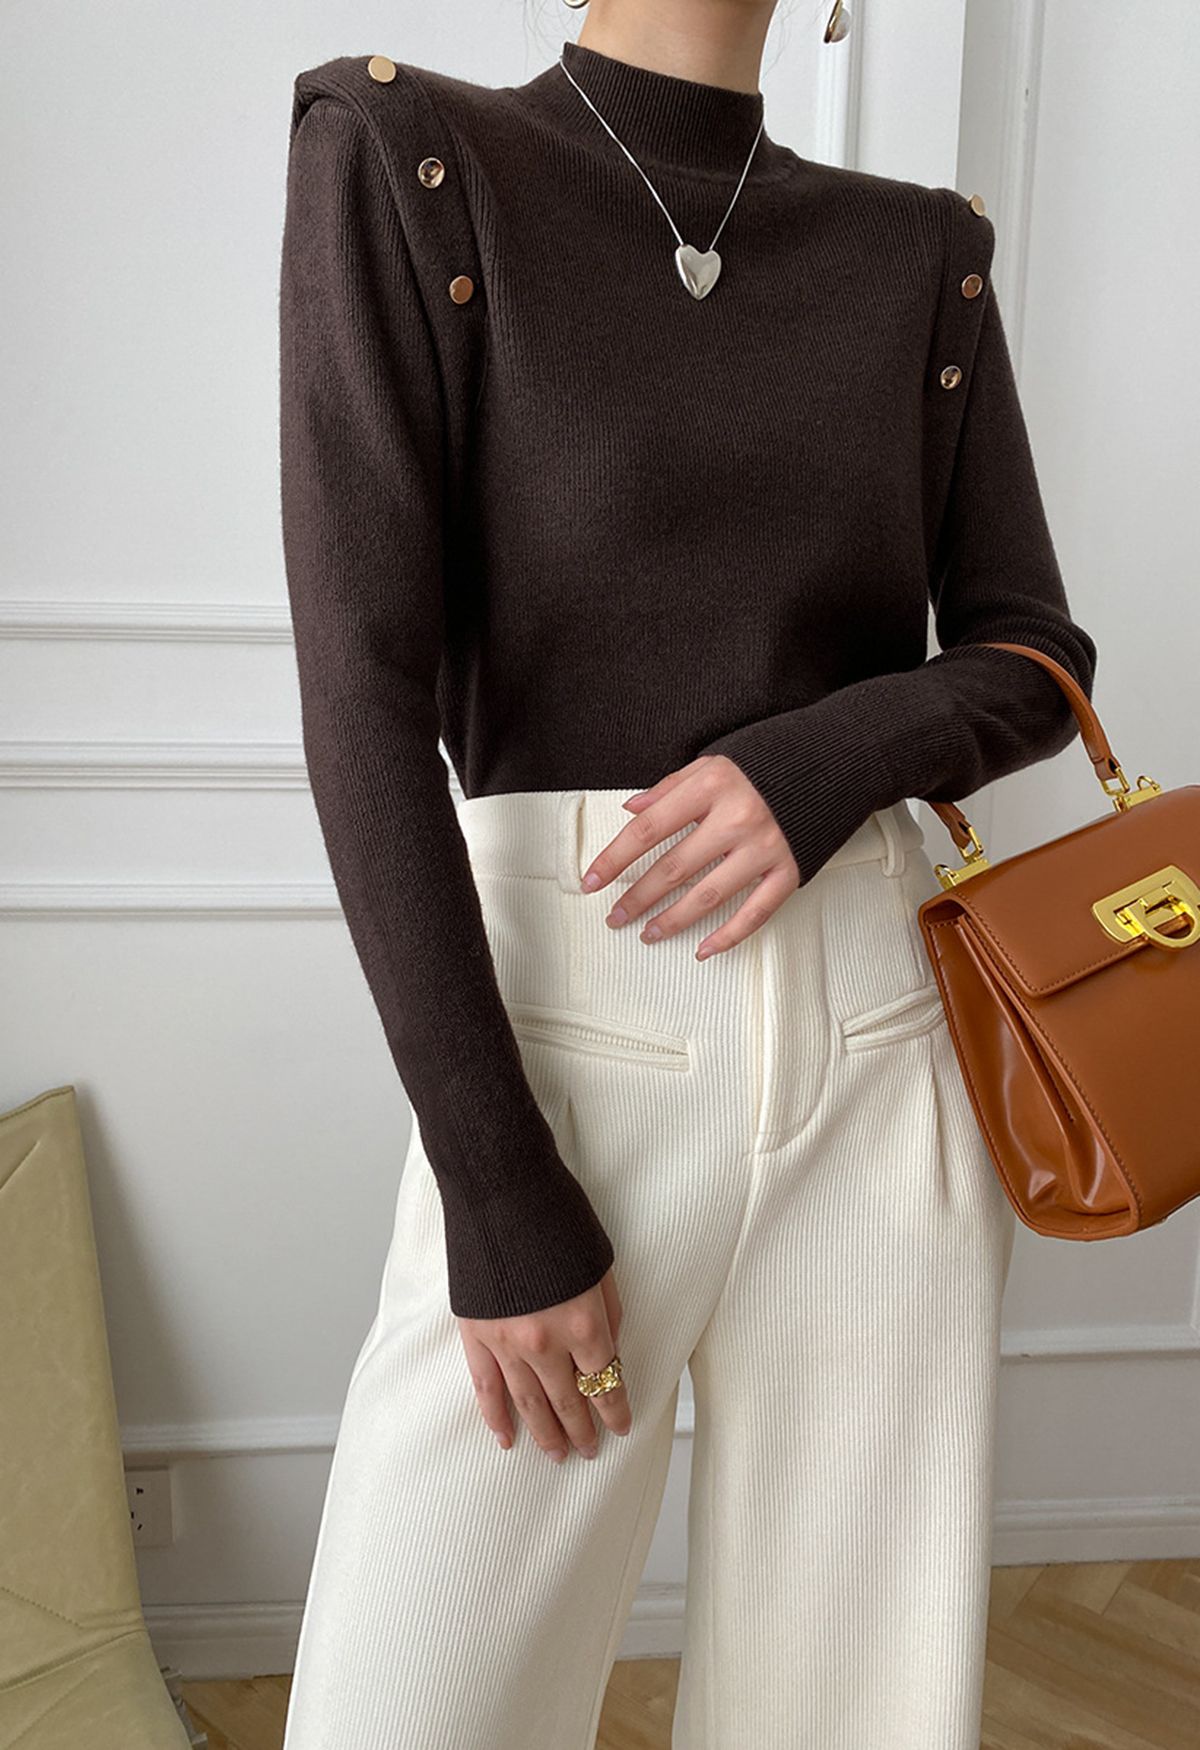 Buttons Embellished Mock Neck Knit Top in Brown